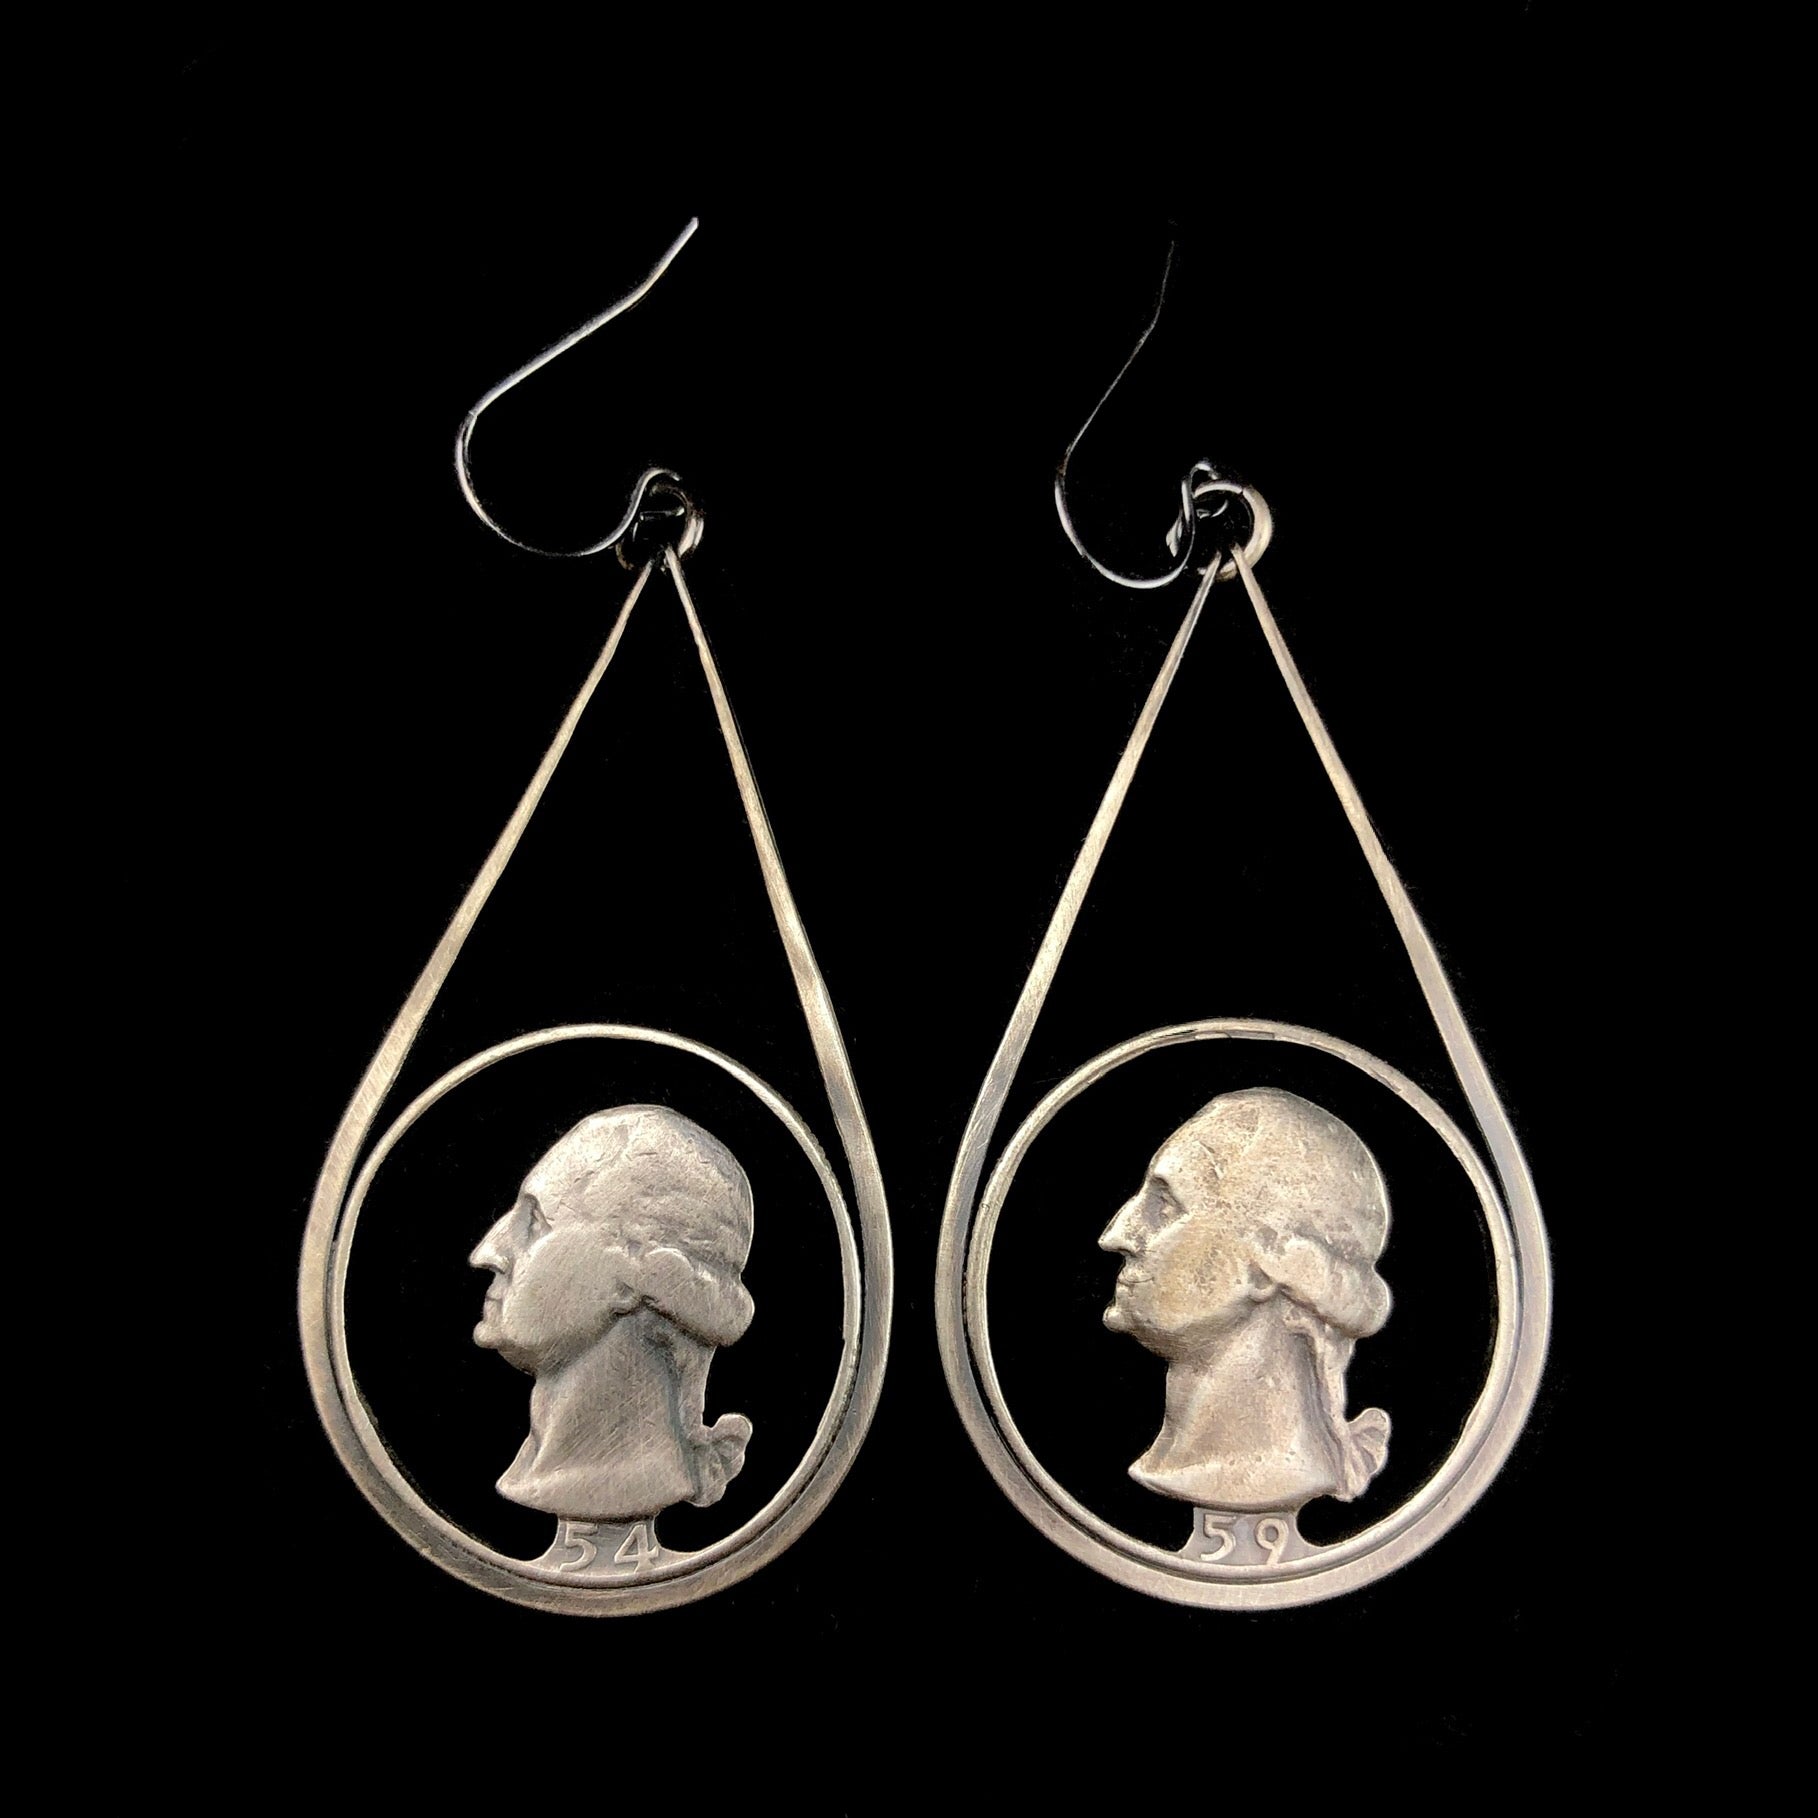 Front view of Quarter Coin Earrings showing 54 and 59, the years they were minted